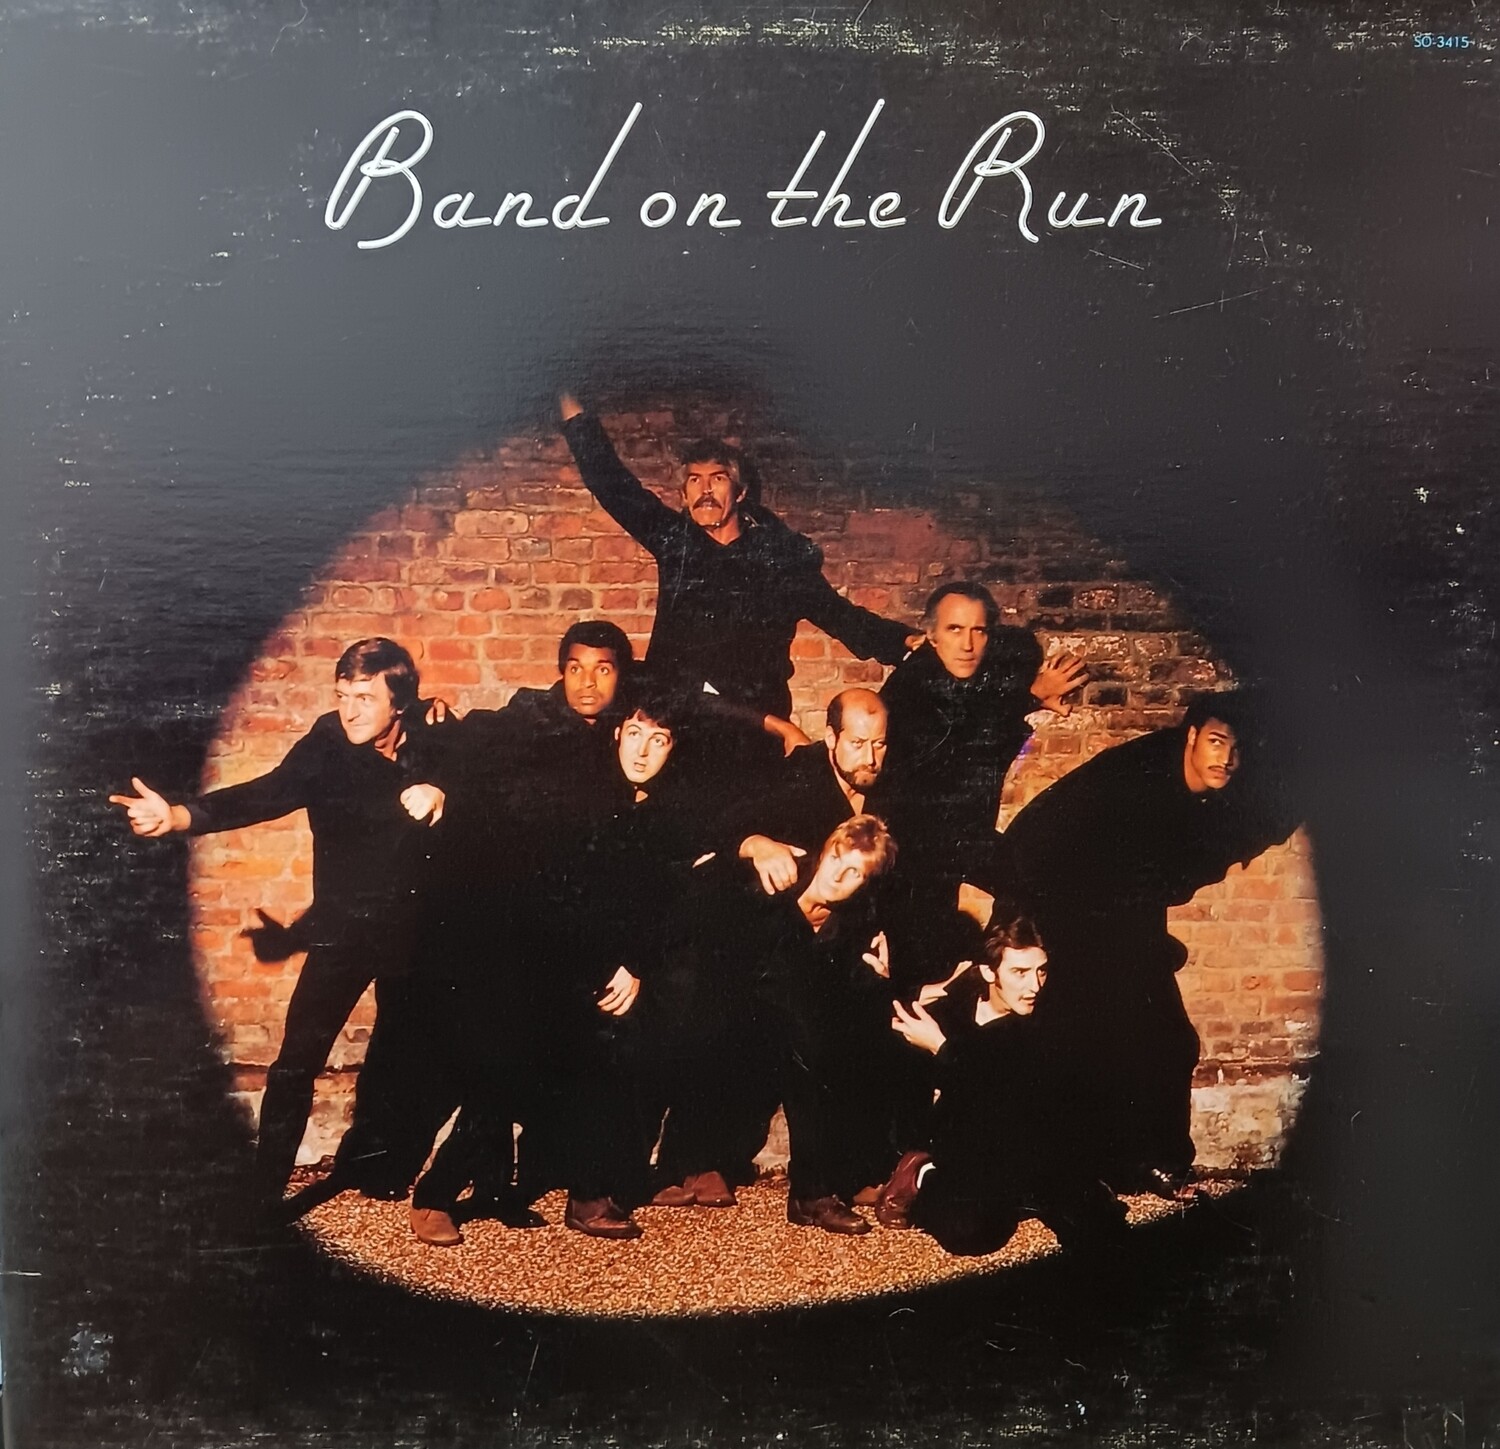 WINGS - Band on the run